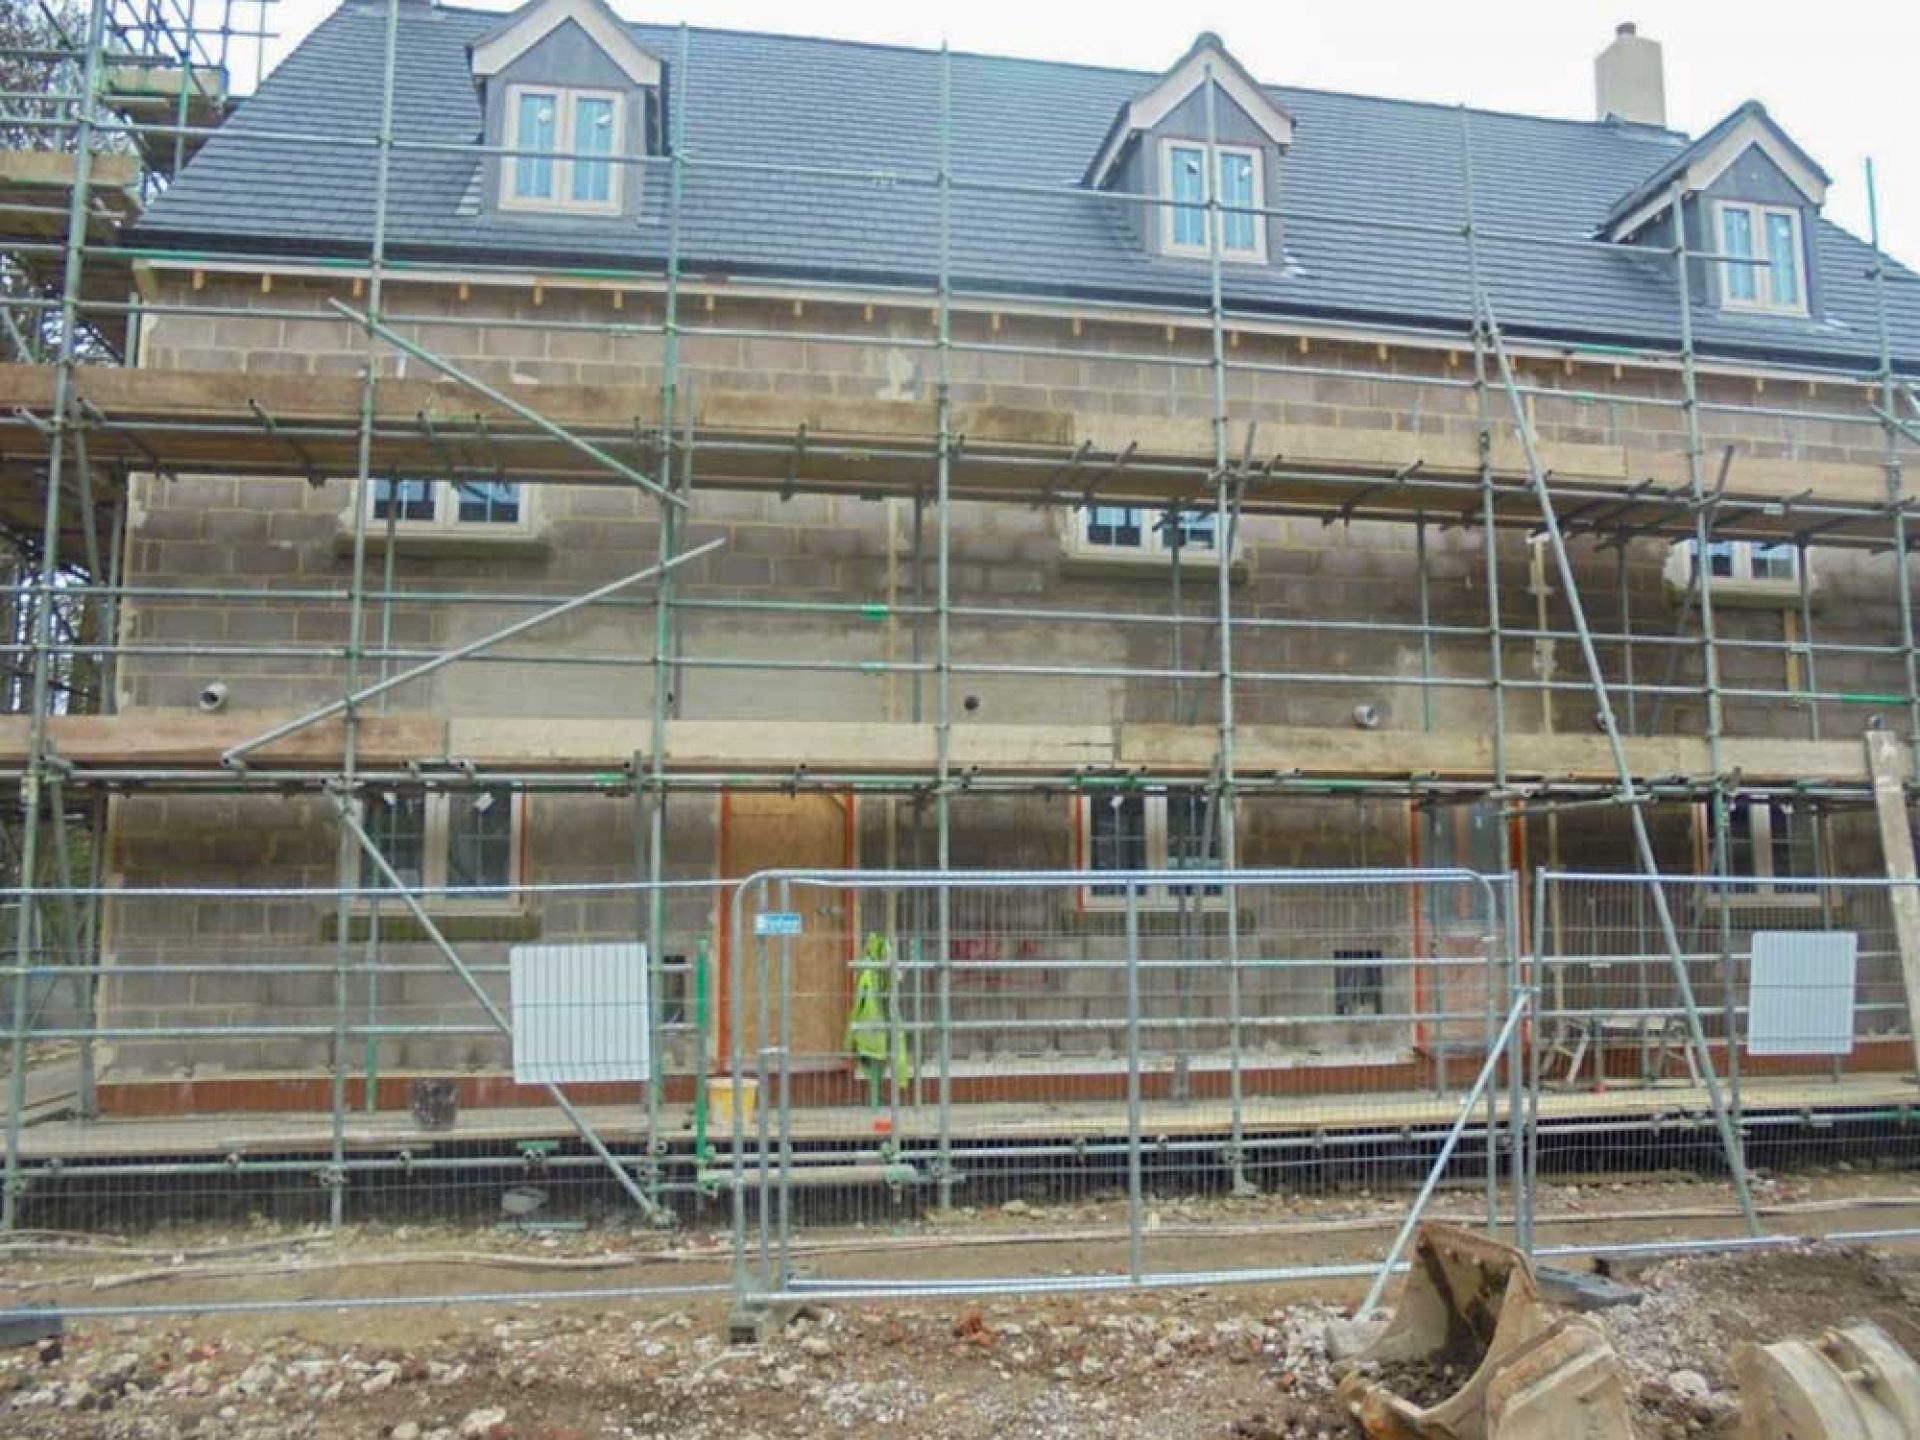 Scaffolding outside of three new houses as part of a new development.